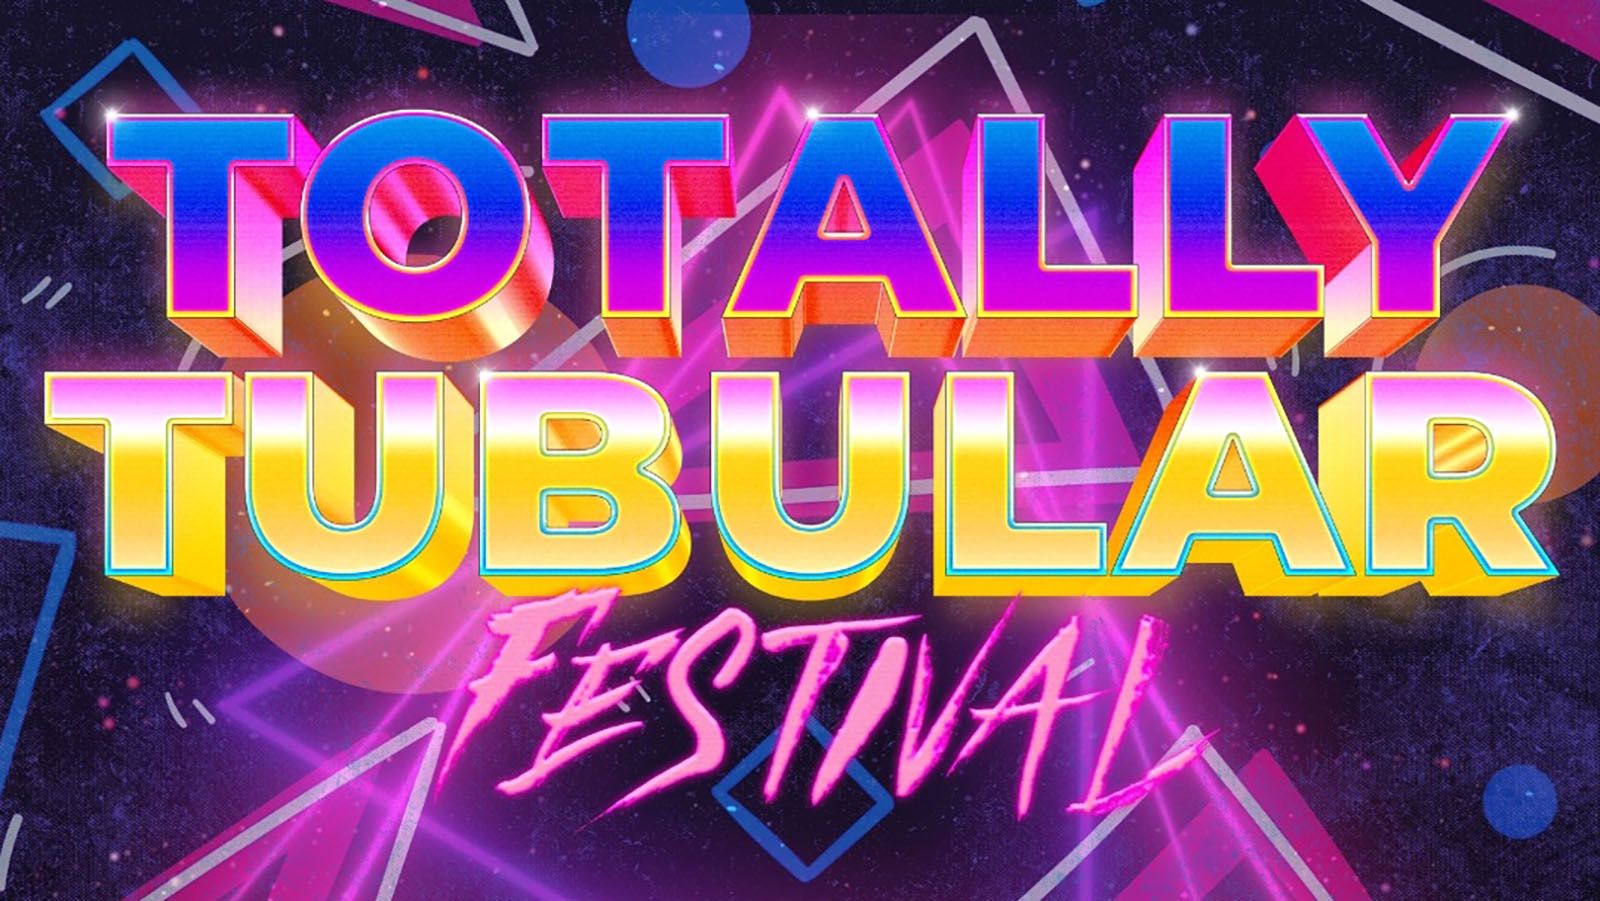 The Totally Tubular Festival will travel the country with some of your favorite acts from the 1980s.